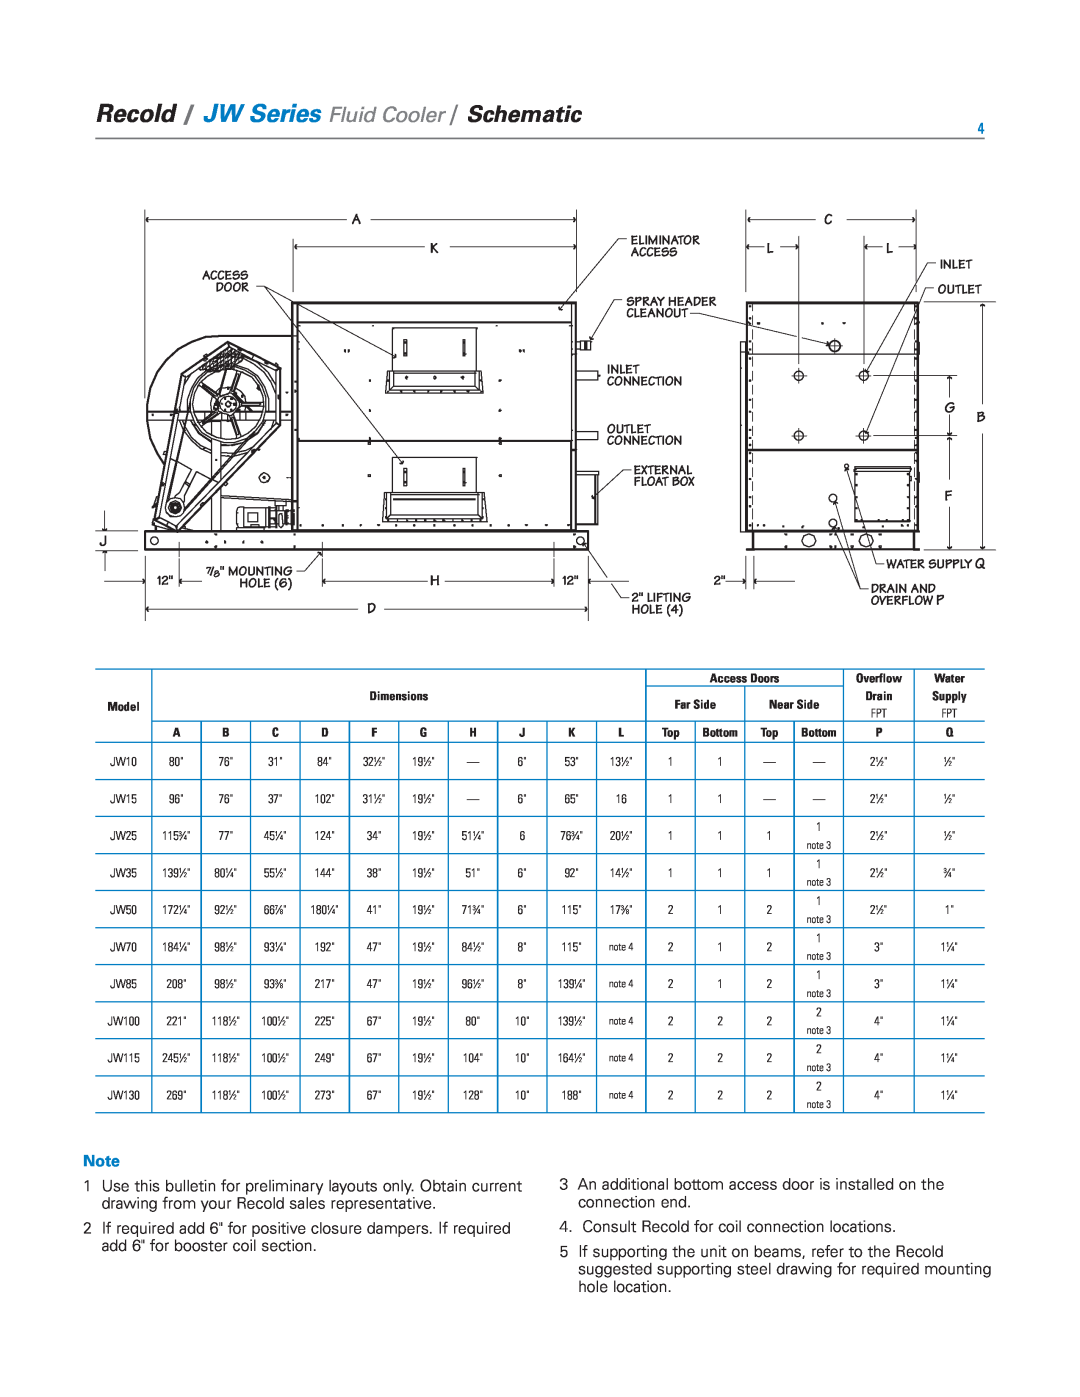 SPX Cooling Technologies manual Recold / JW Series Fluid Cooler / Schematic 